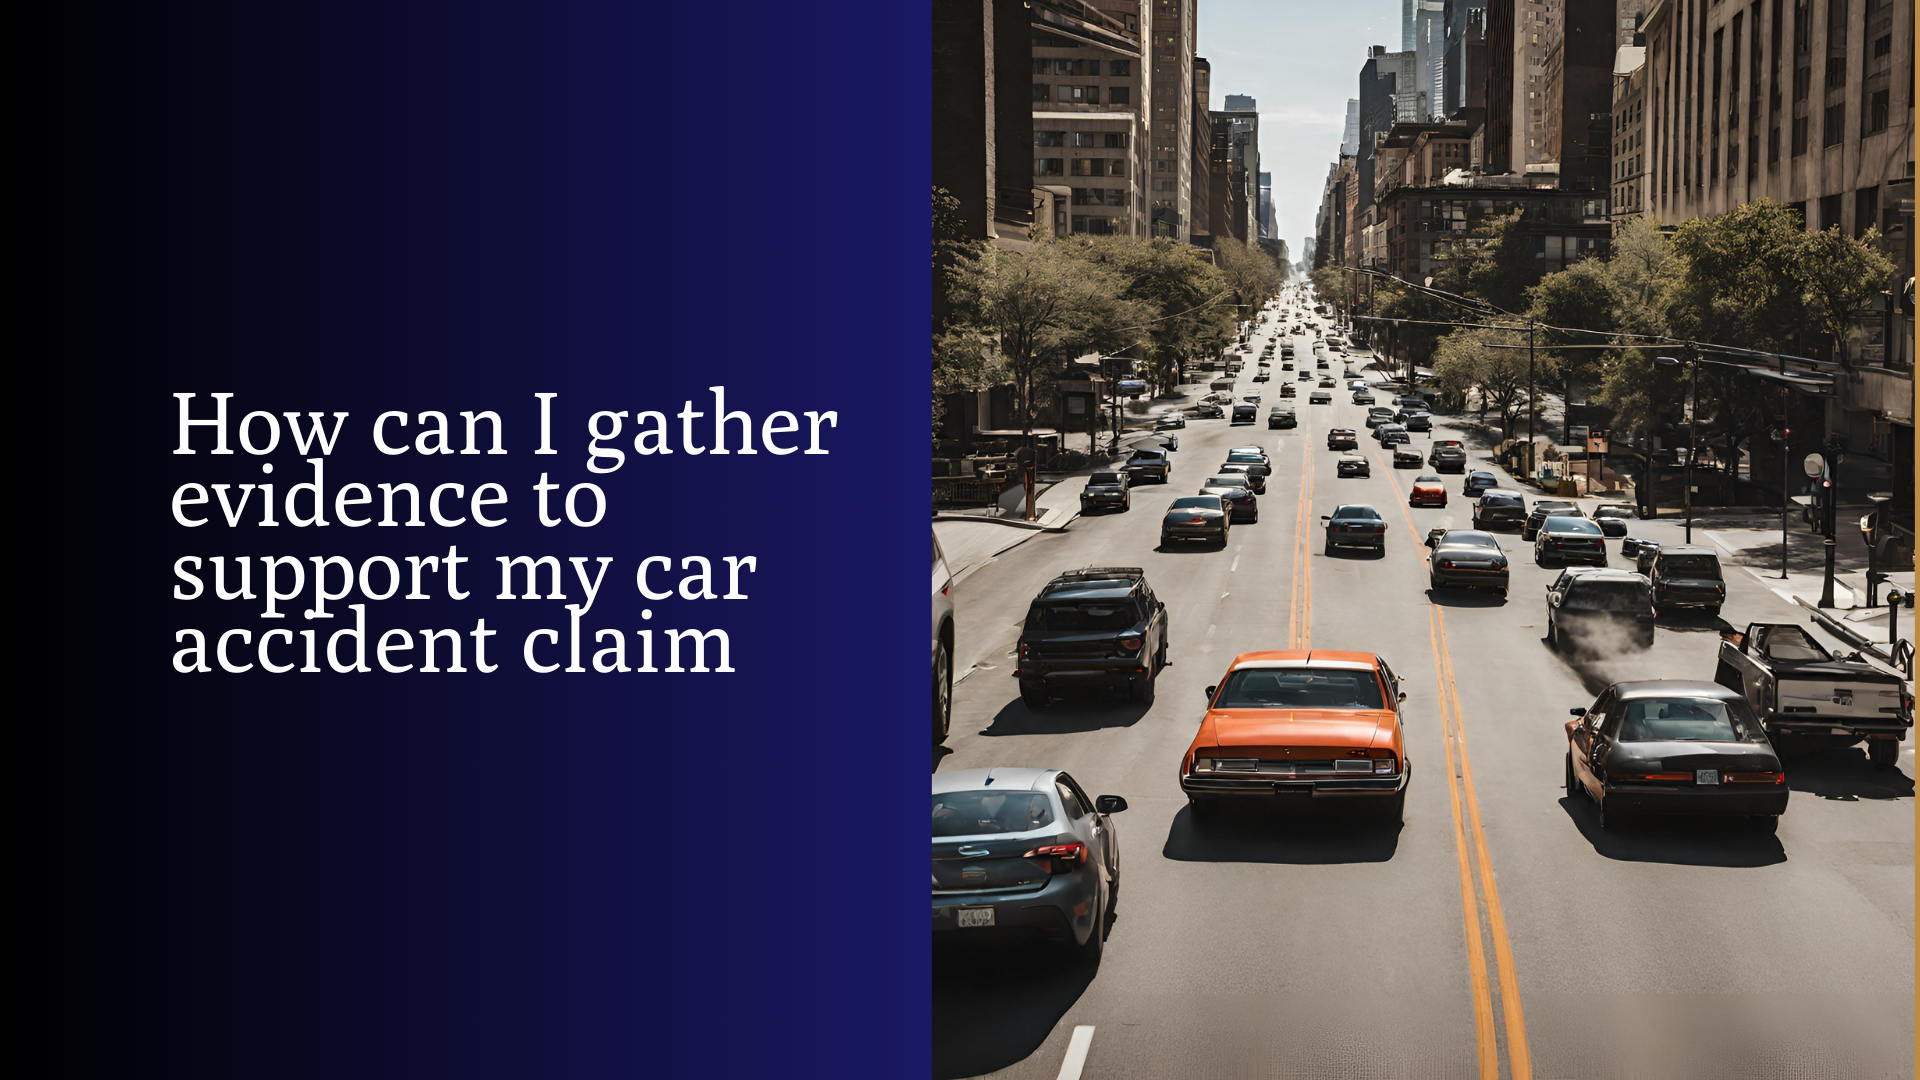 How-can-I-gather-evidence-to-support-my-car-accident-claim